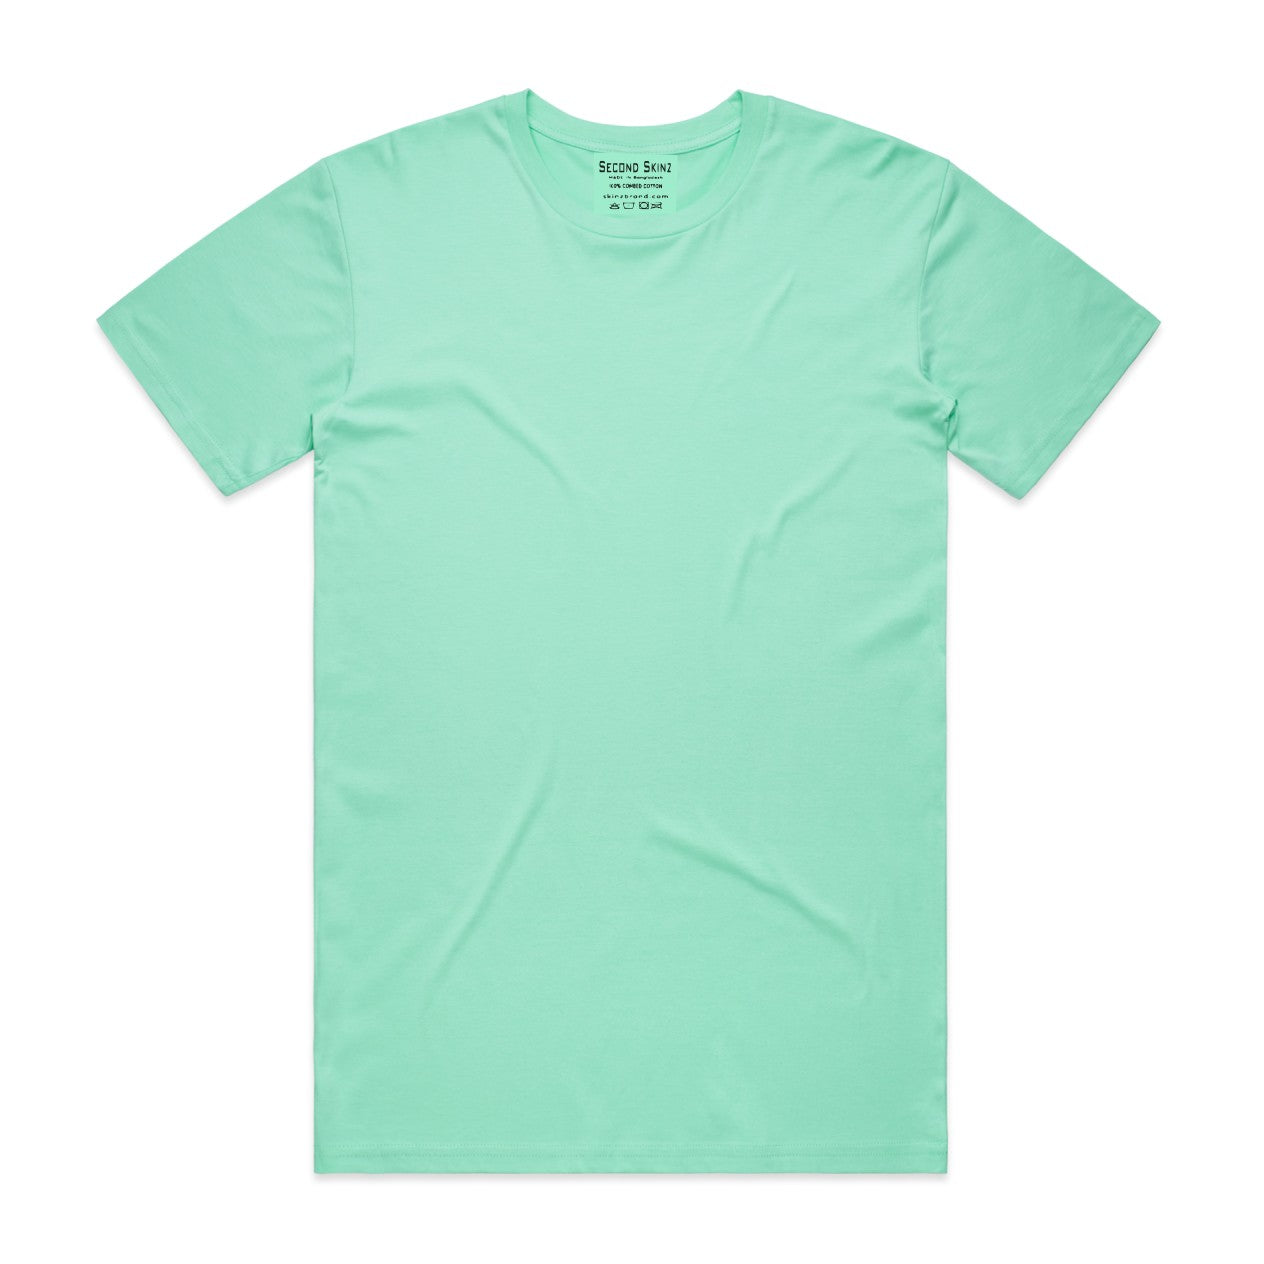 This medium weighted Aqua Iconic Classic T-Shirt from Second Skinz